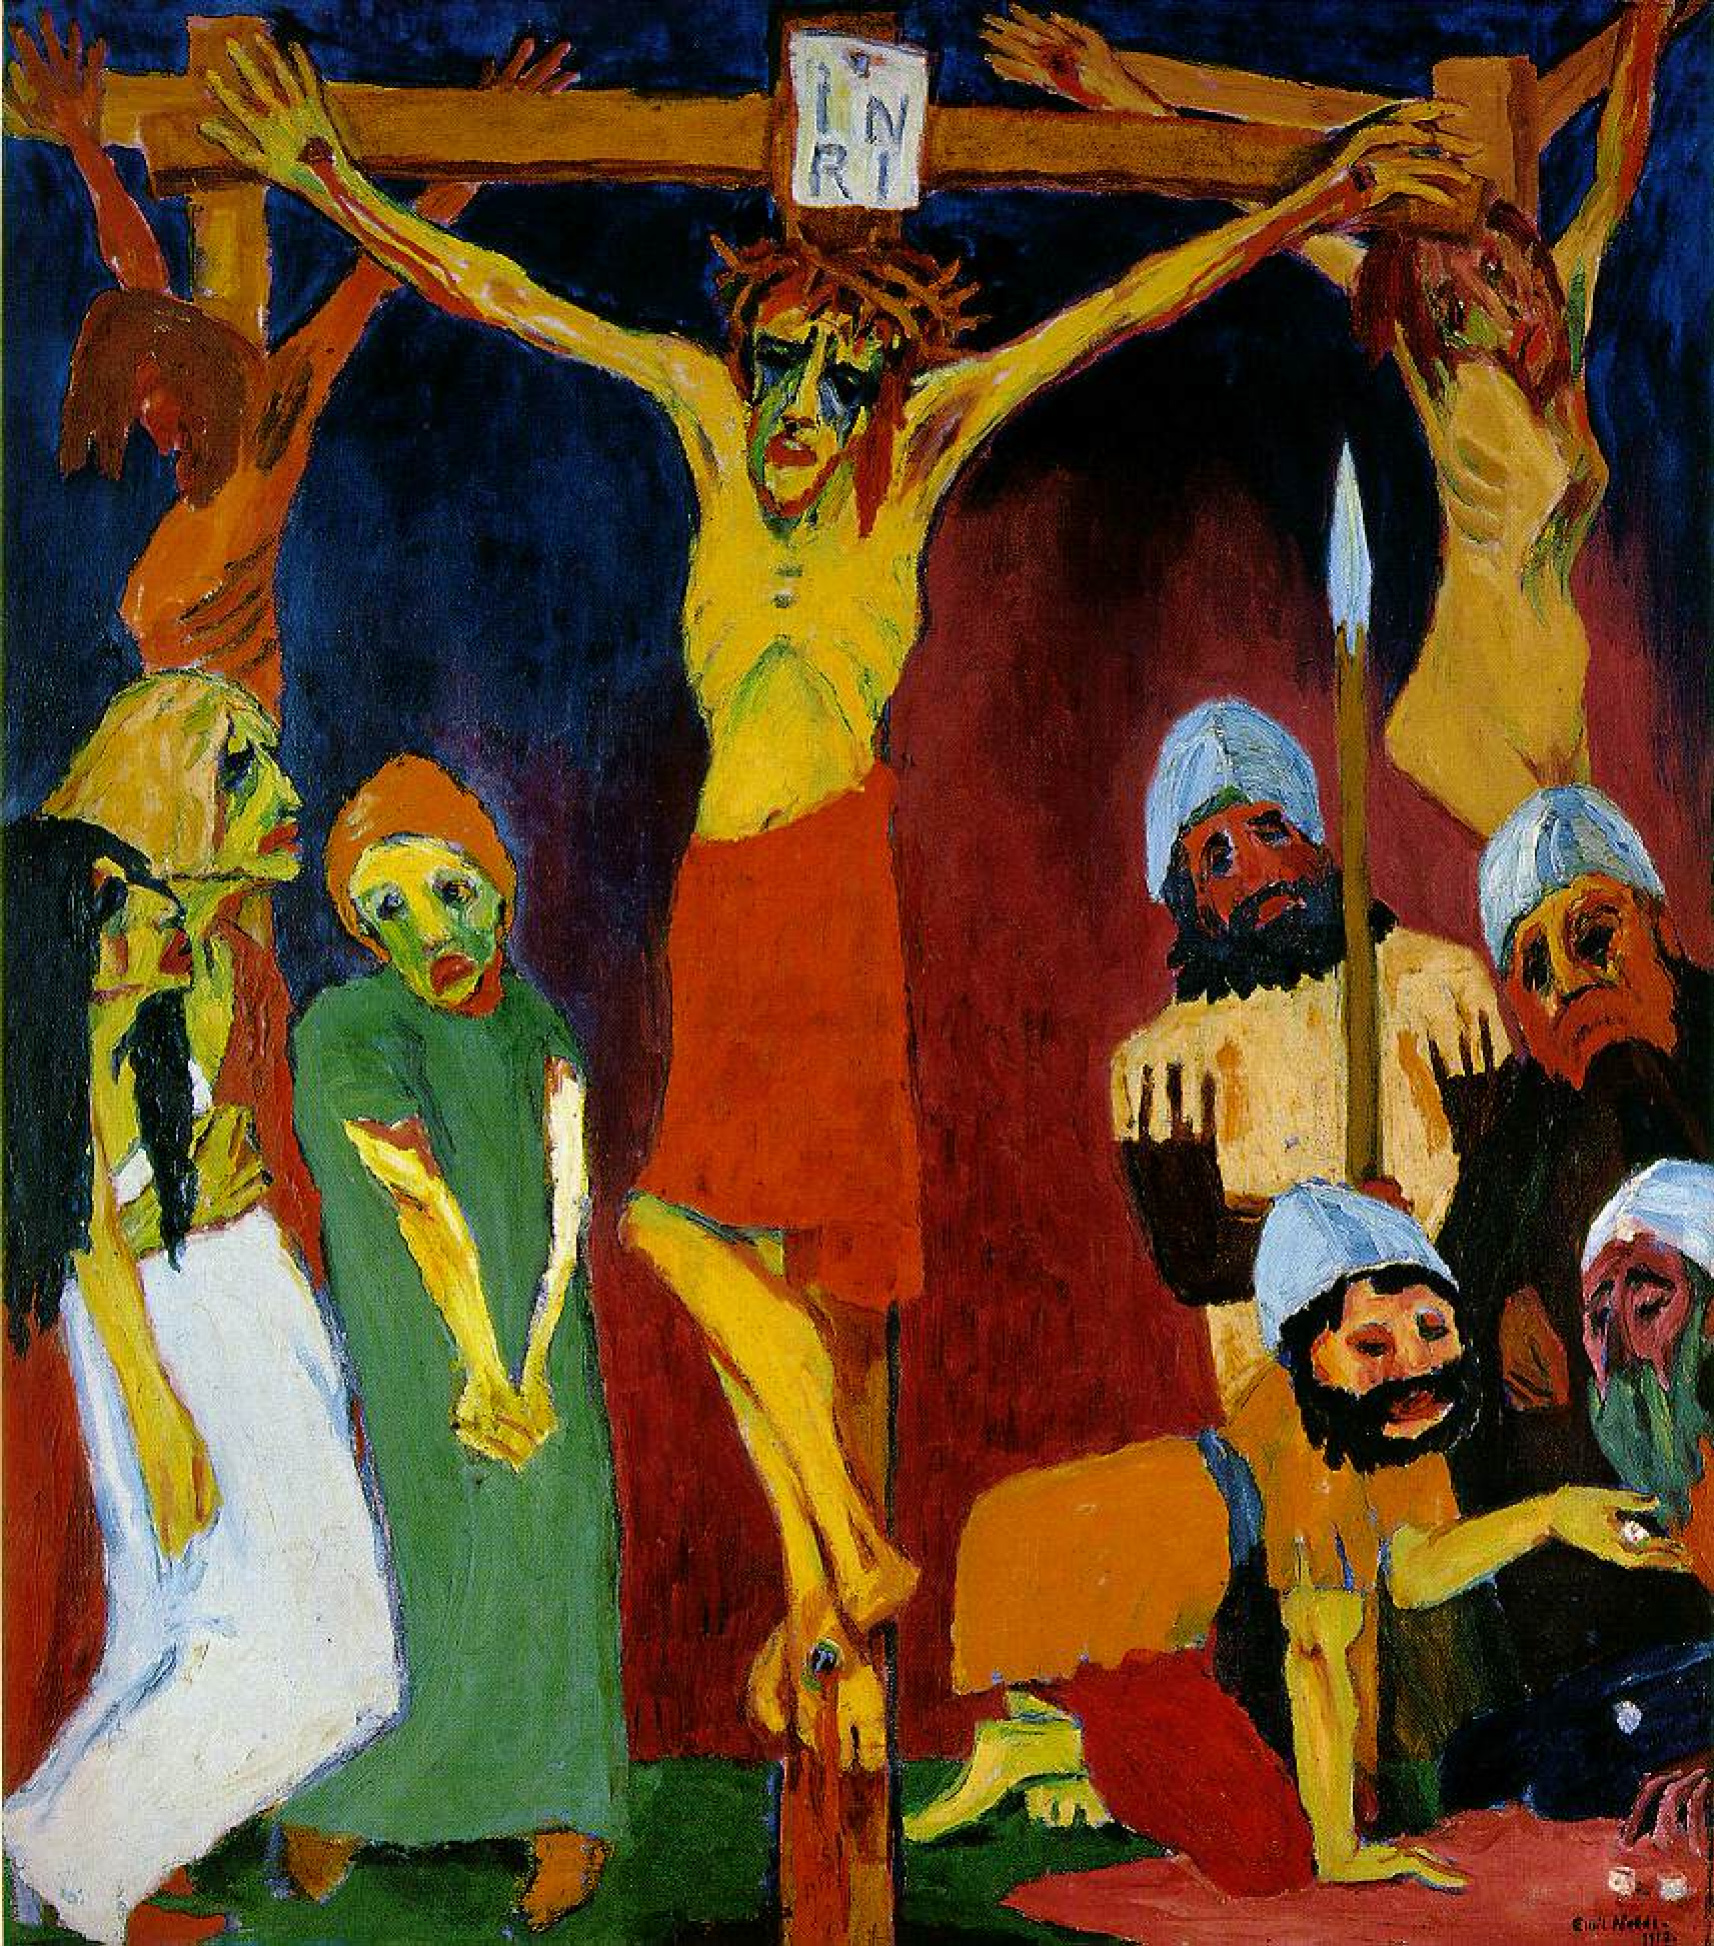 Emil Nolde, Crucifixion, from The Life of Christ (triptych), 1911-12 (Städel Museum, Frankfurt)